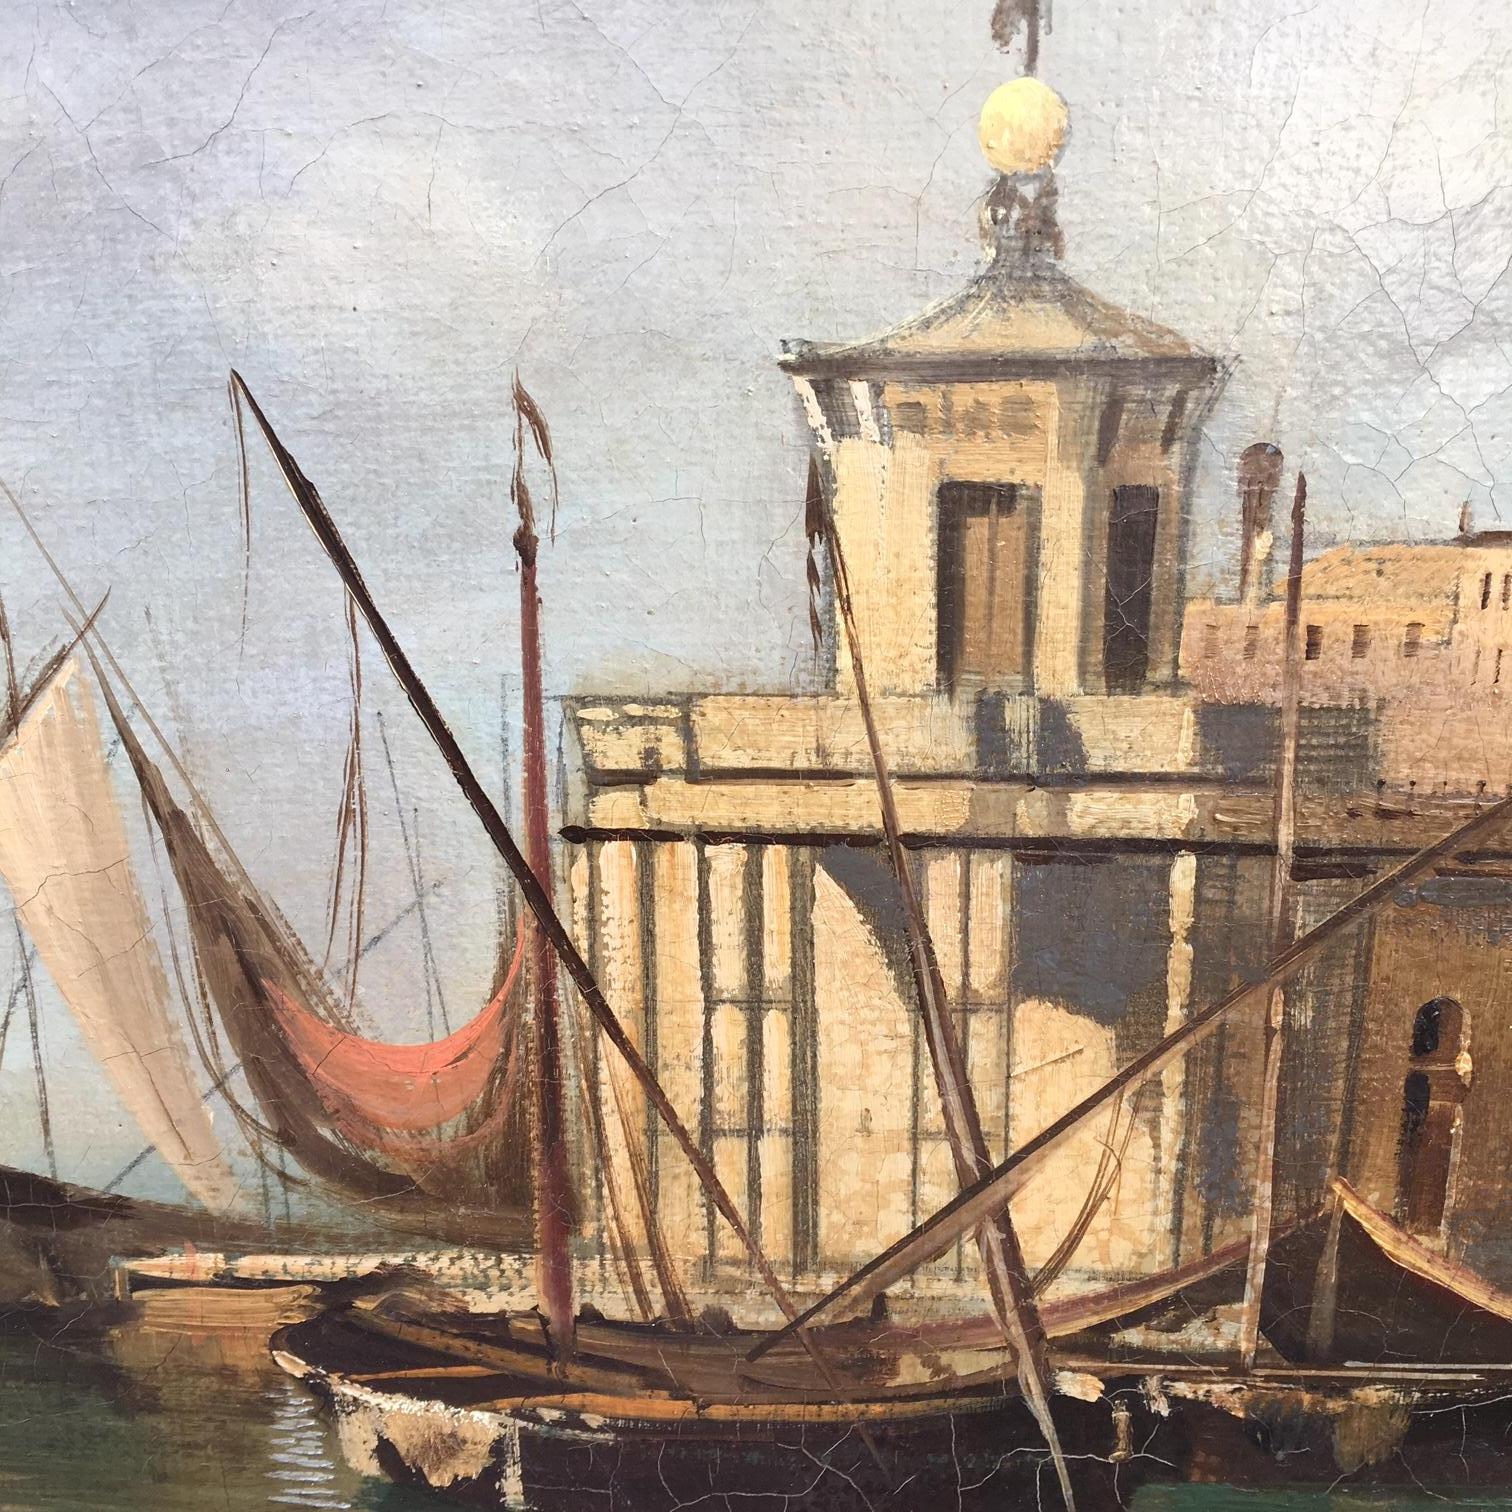 VENICE SAN GIORGIO ISLAND- In the Manner of Canaletto - Oil on Canvas Painting For Sale 2